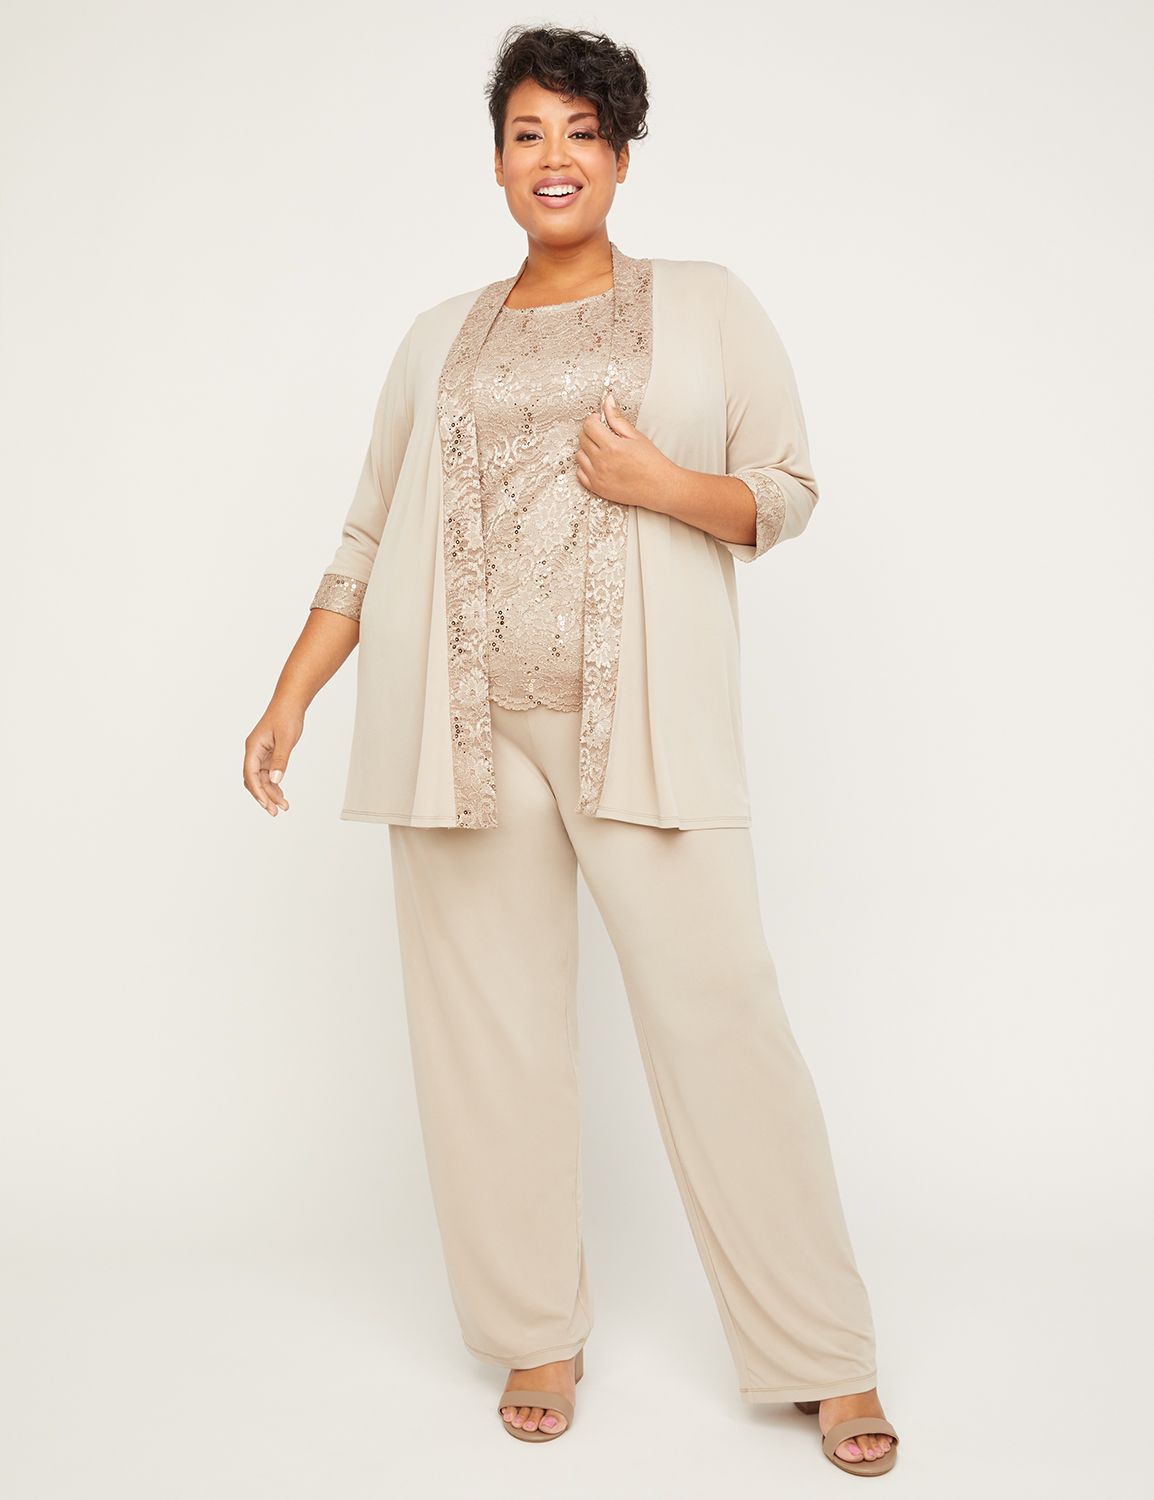 wedding pant suits for mother of the bride plus size